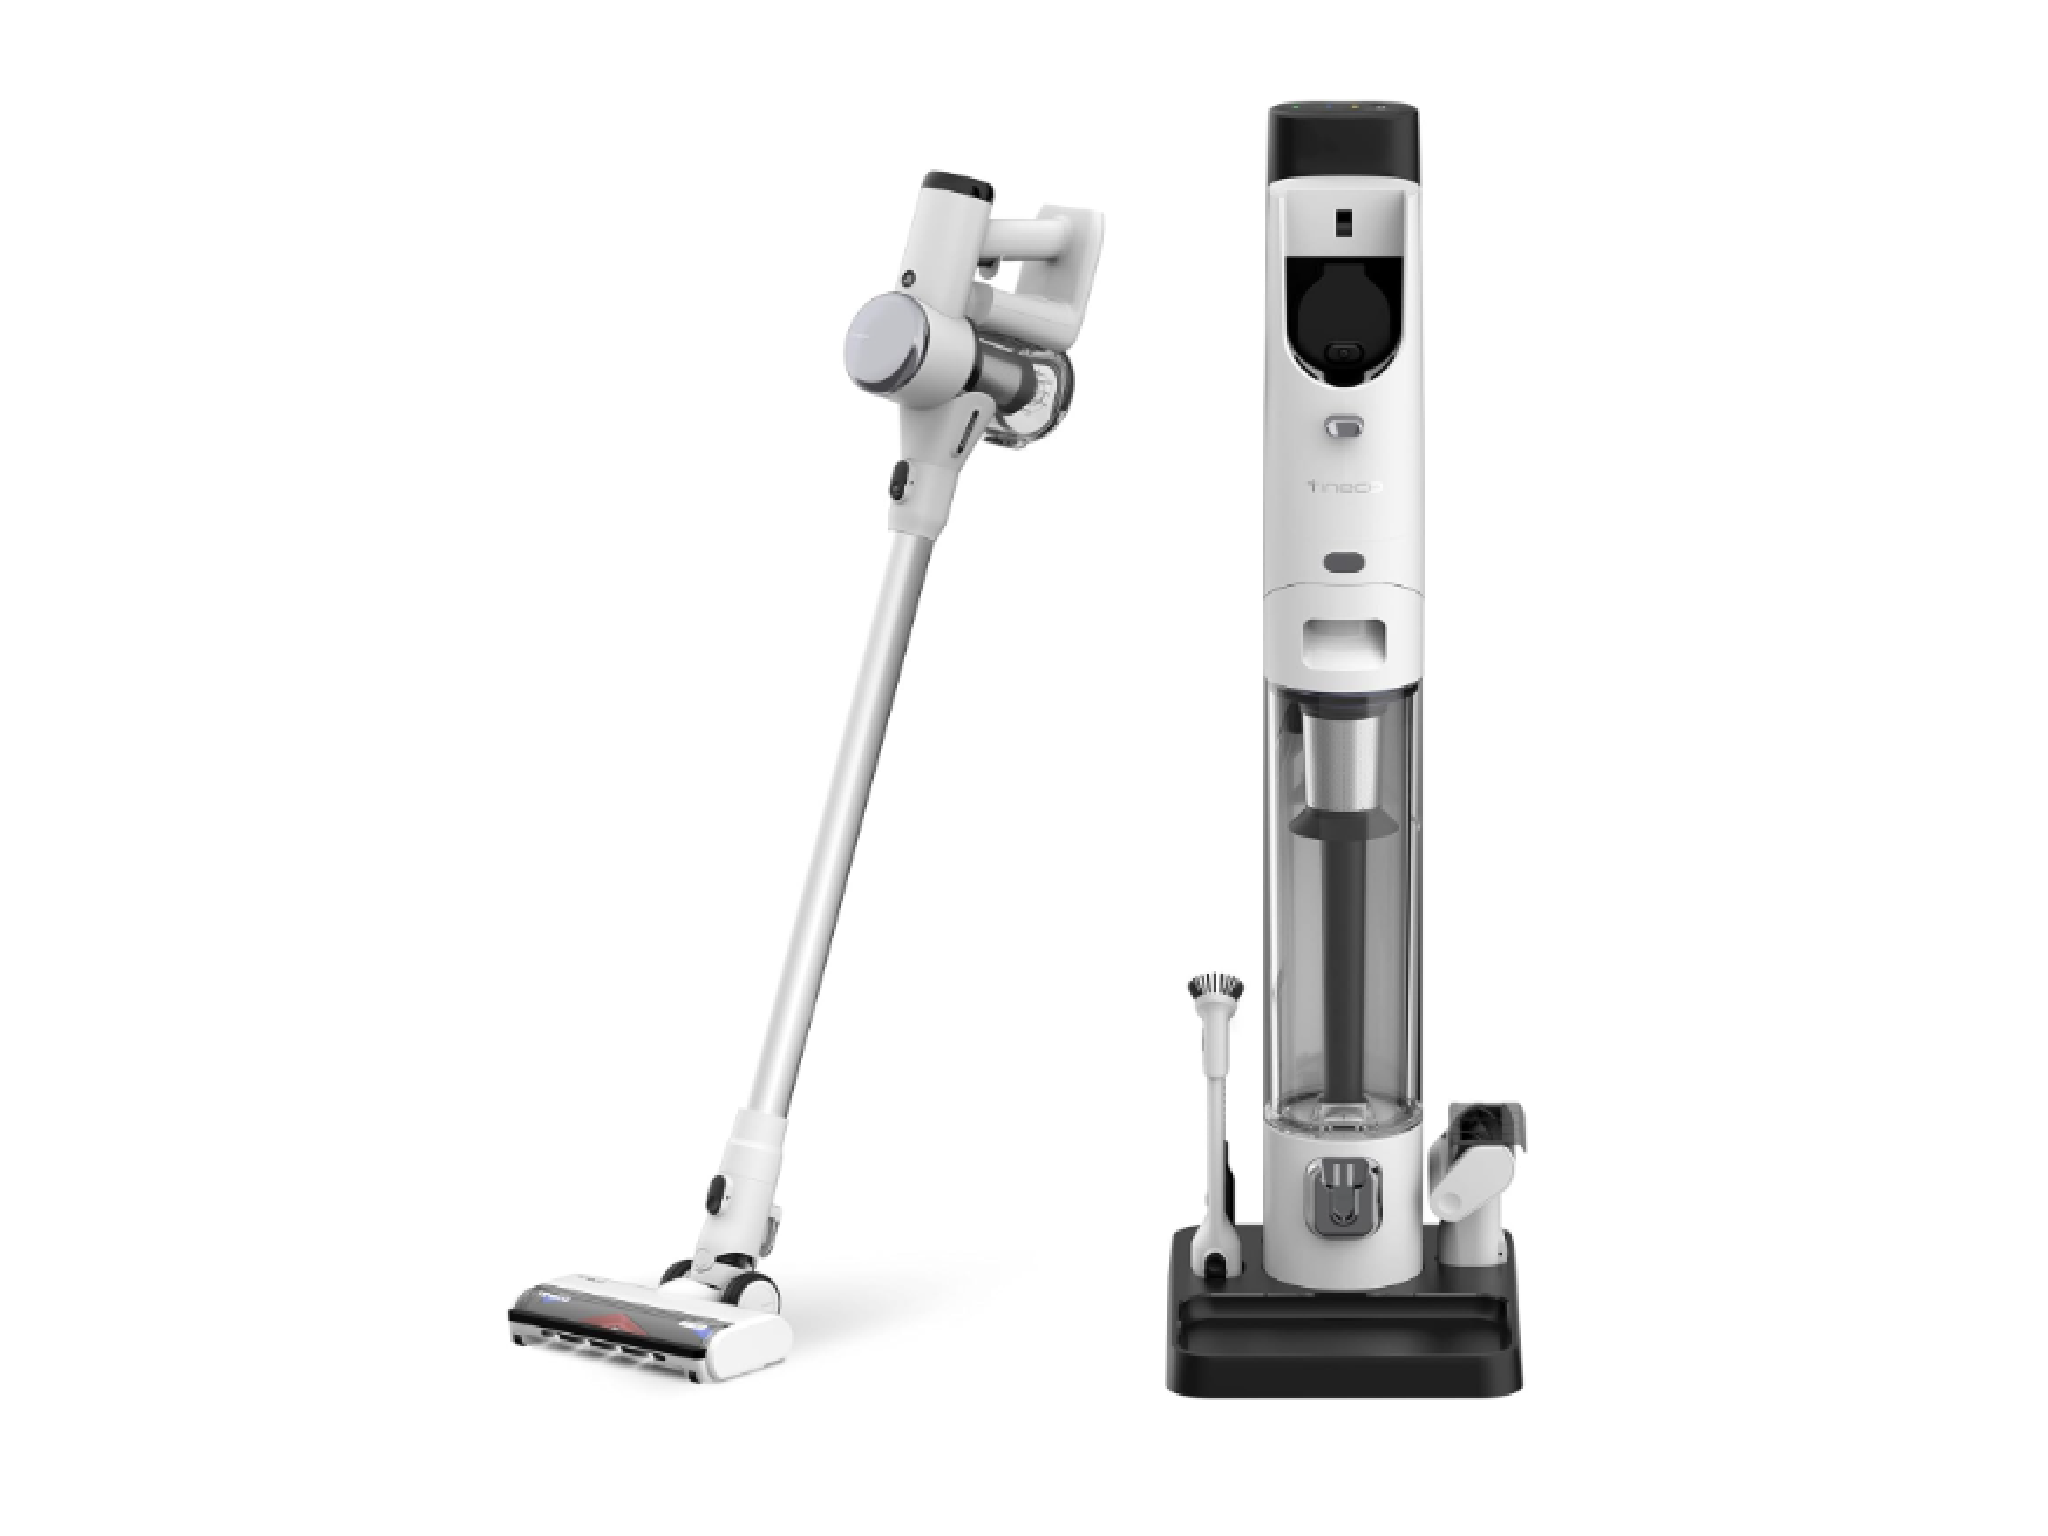 Tineco Pure One cordless vacuum cleaner